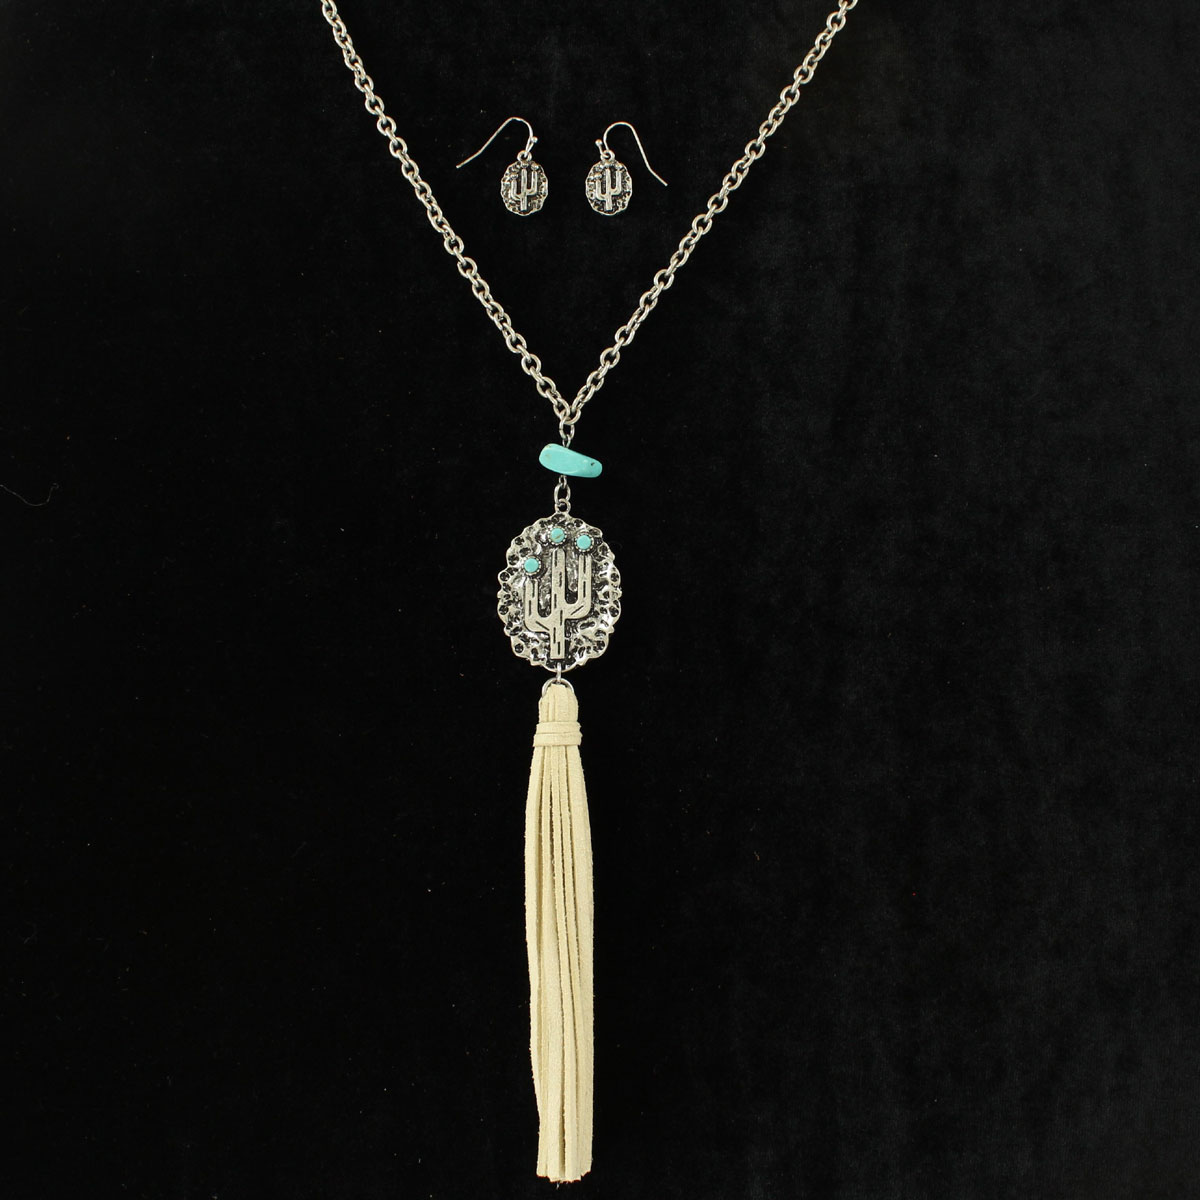 29178 Long Fringe Stone Cactus Necklace & Earrings Set, Turquoise - 30 To 33 In.